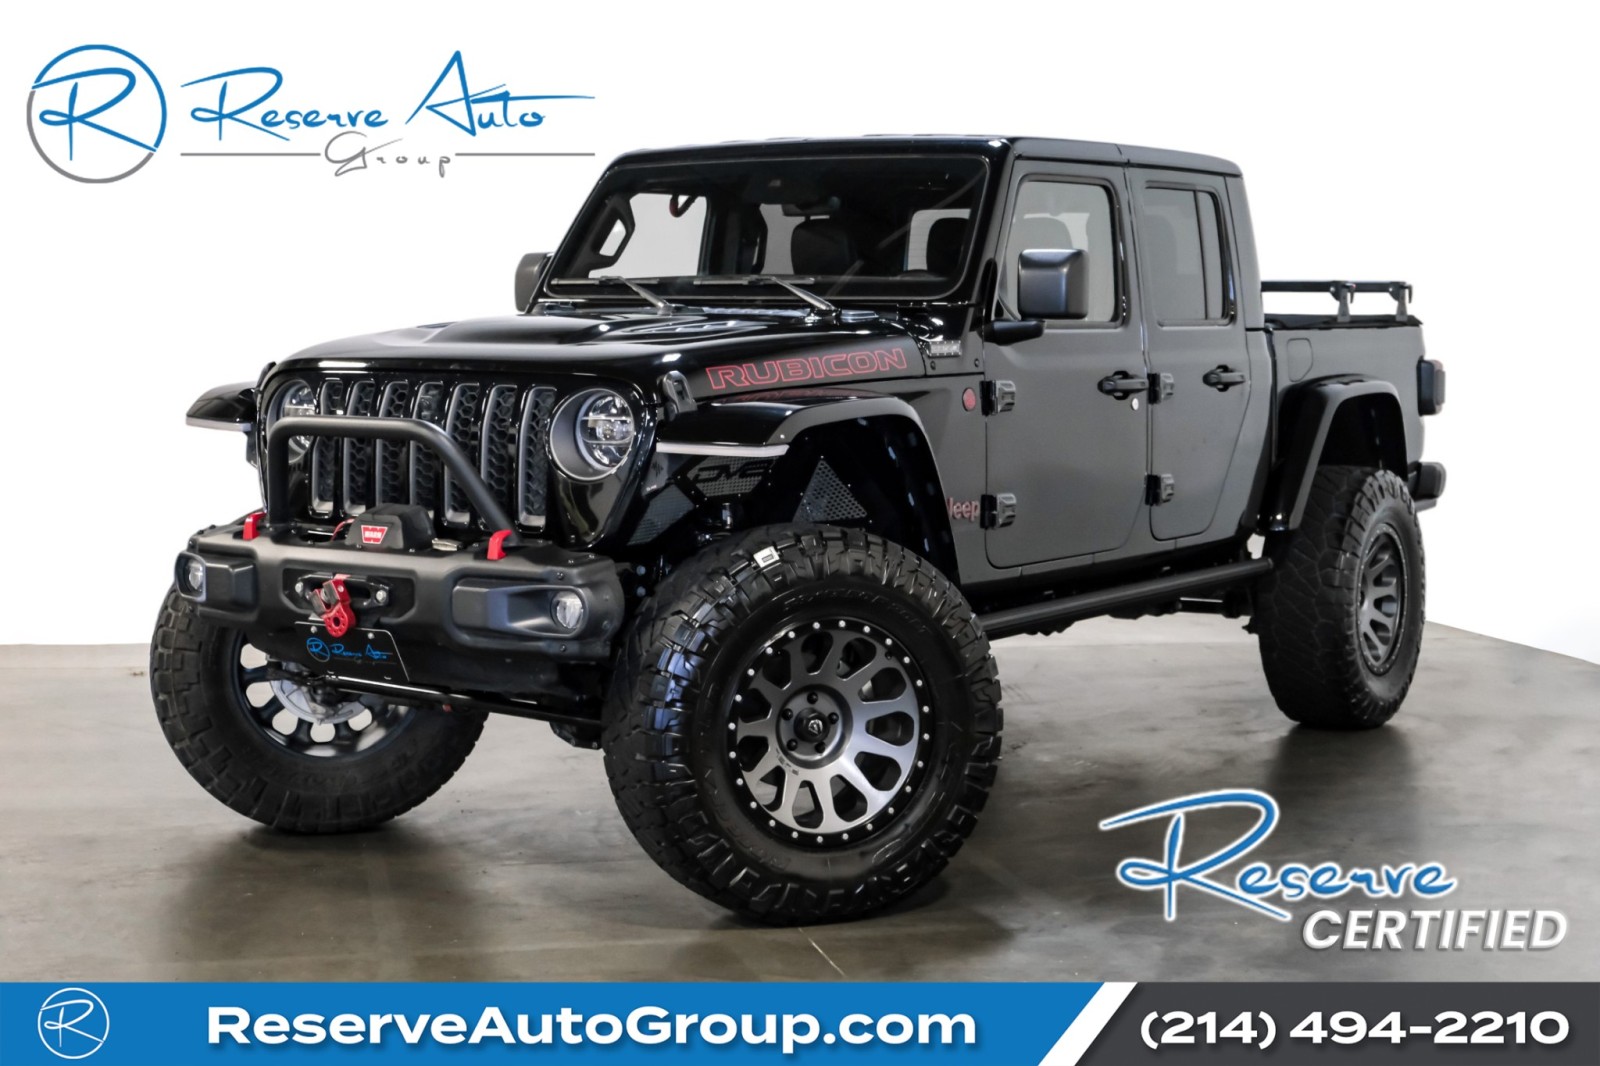 2020 Jeep Gladiator Rubicon 4x4 LaunchEdition 24ZPkg LIFTED CustomBump 1